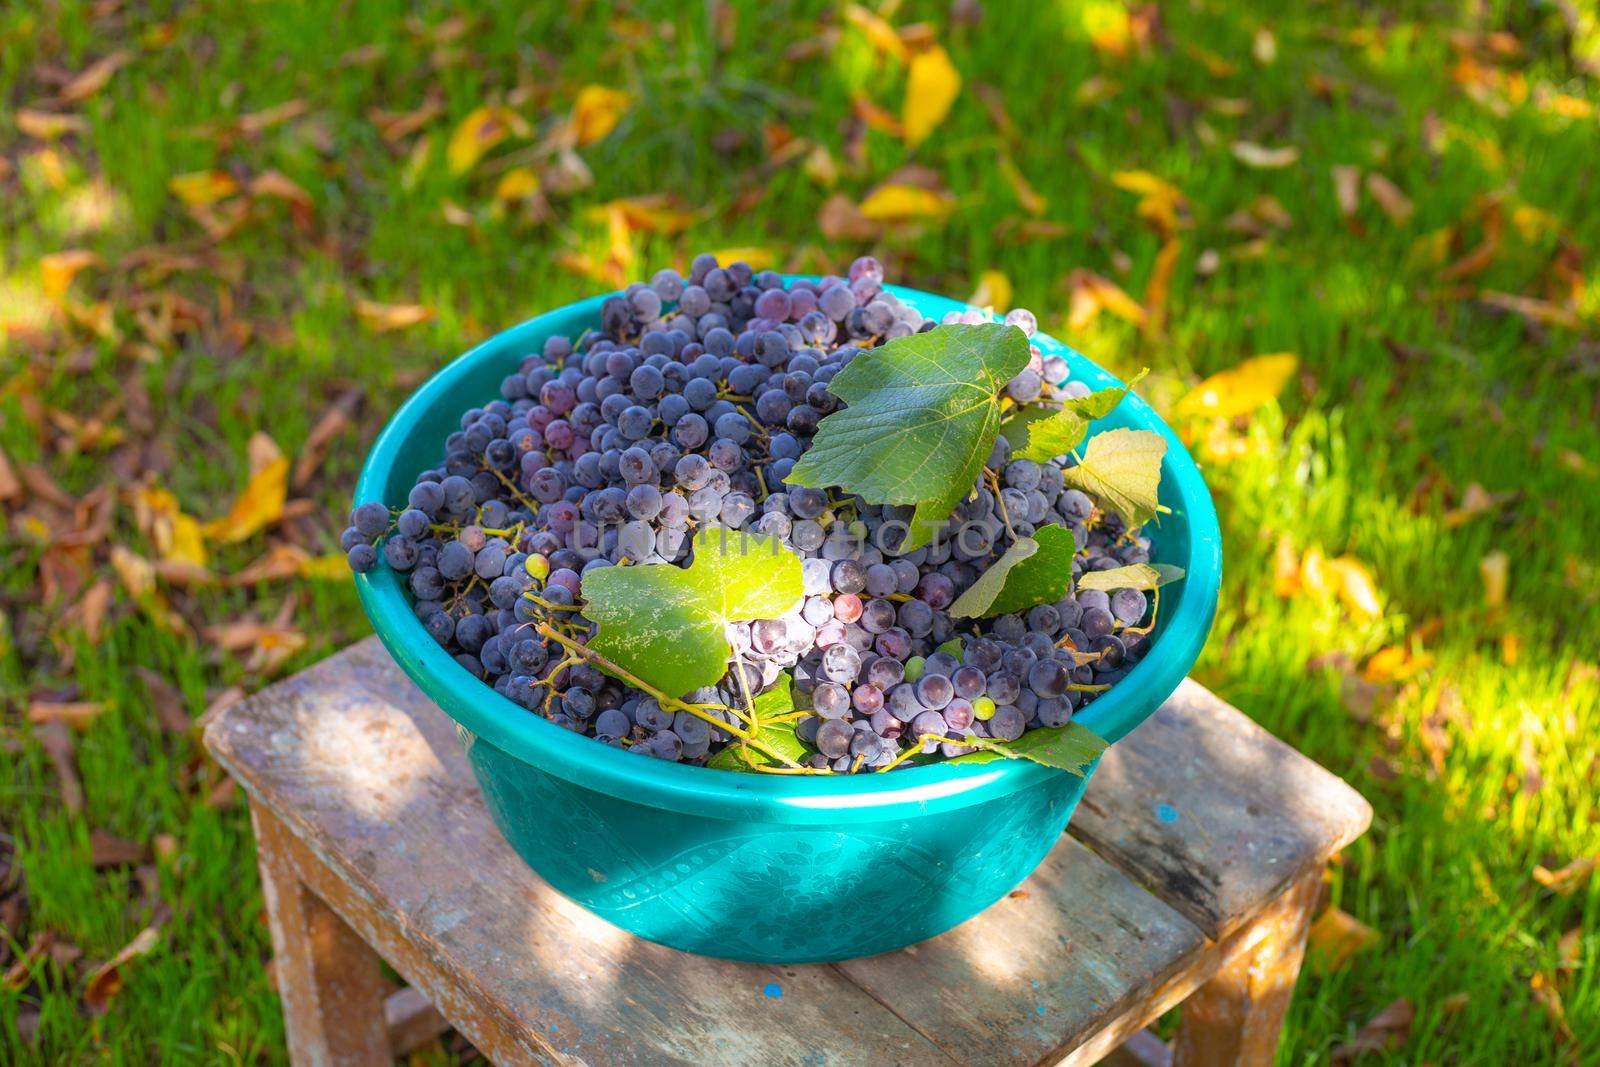 Black ripe grapes in a plastic bowl on a stool in the garden. Harvested harvest.